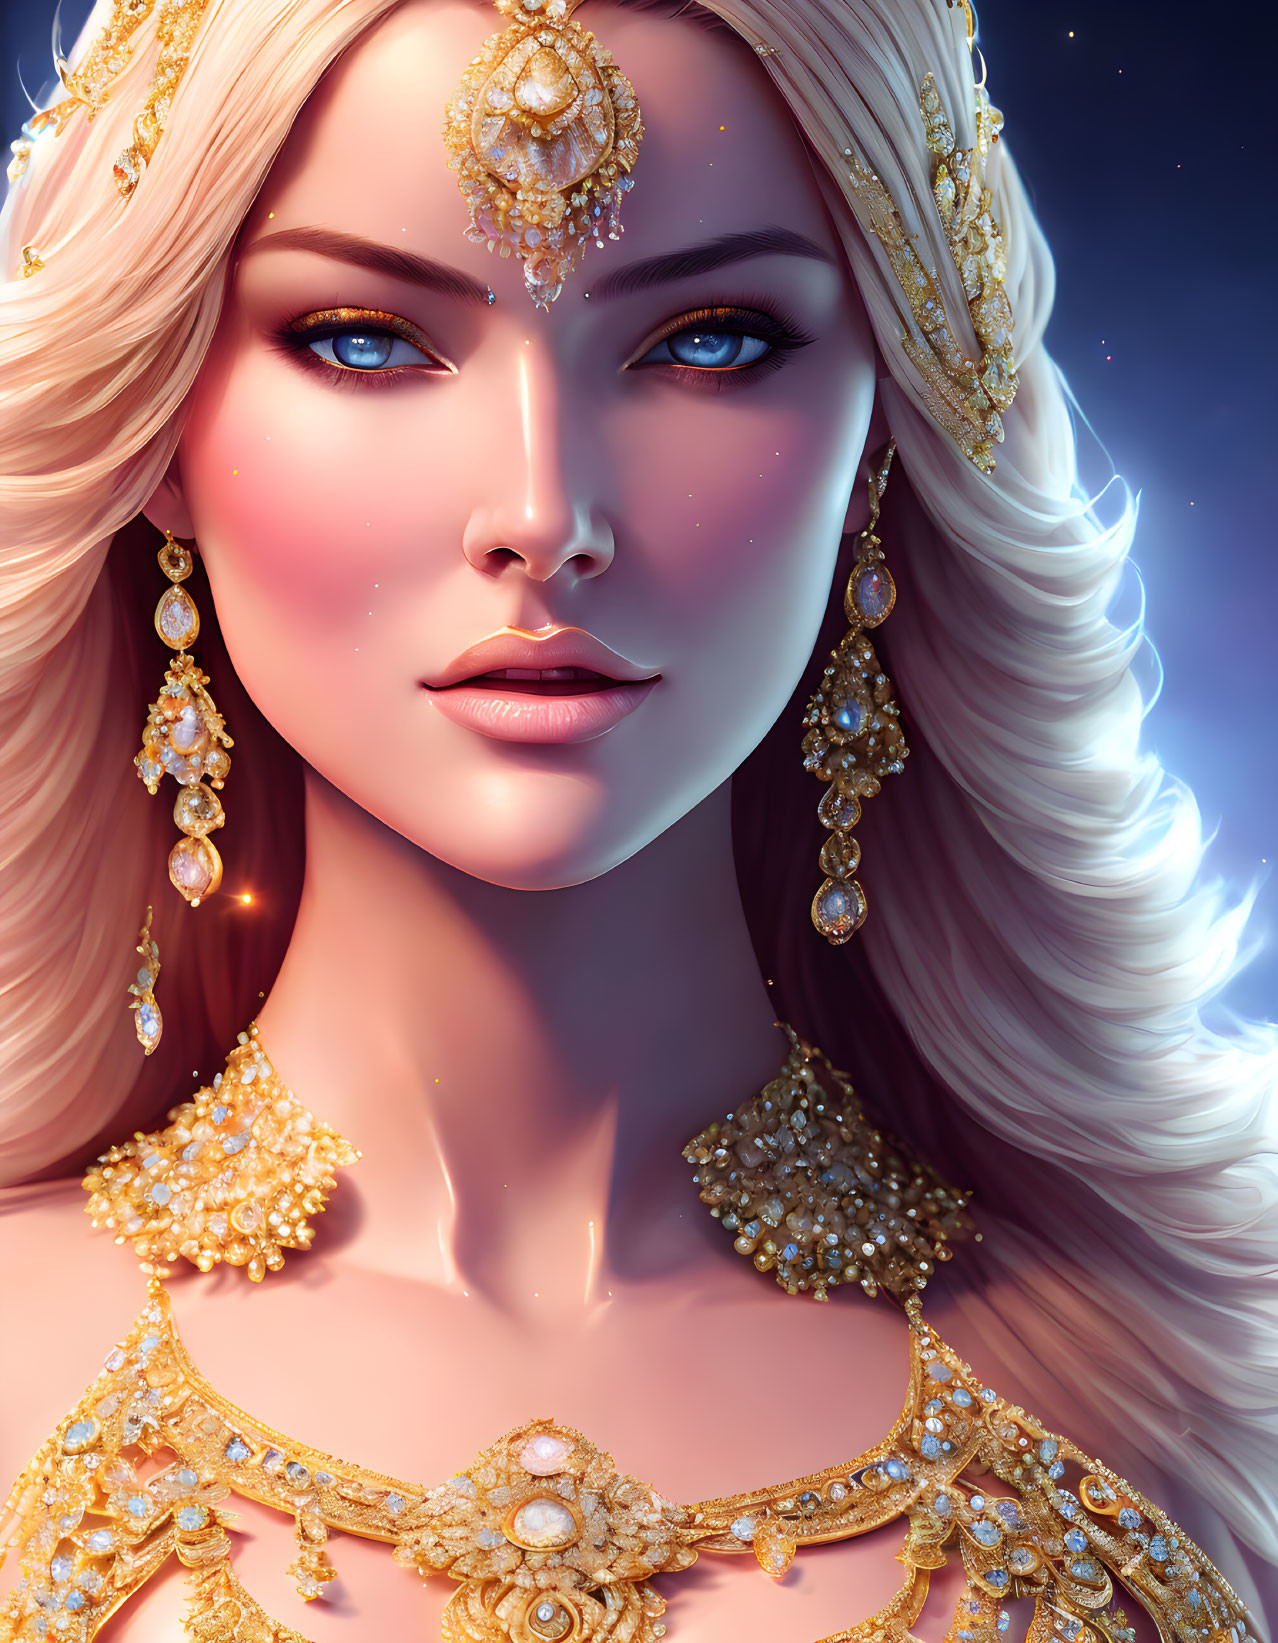 Illustrated woman with golden jewelry, blue eyes, long hair, cosmic background